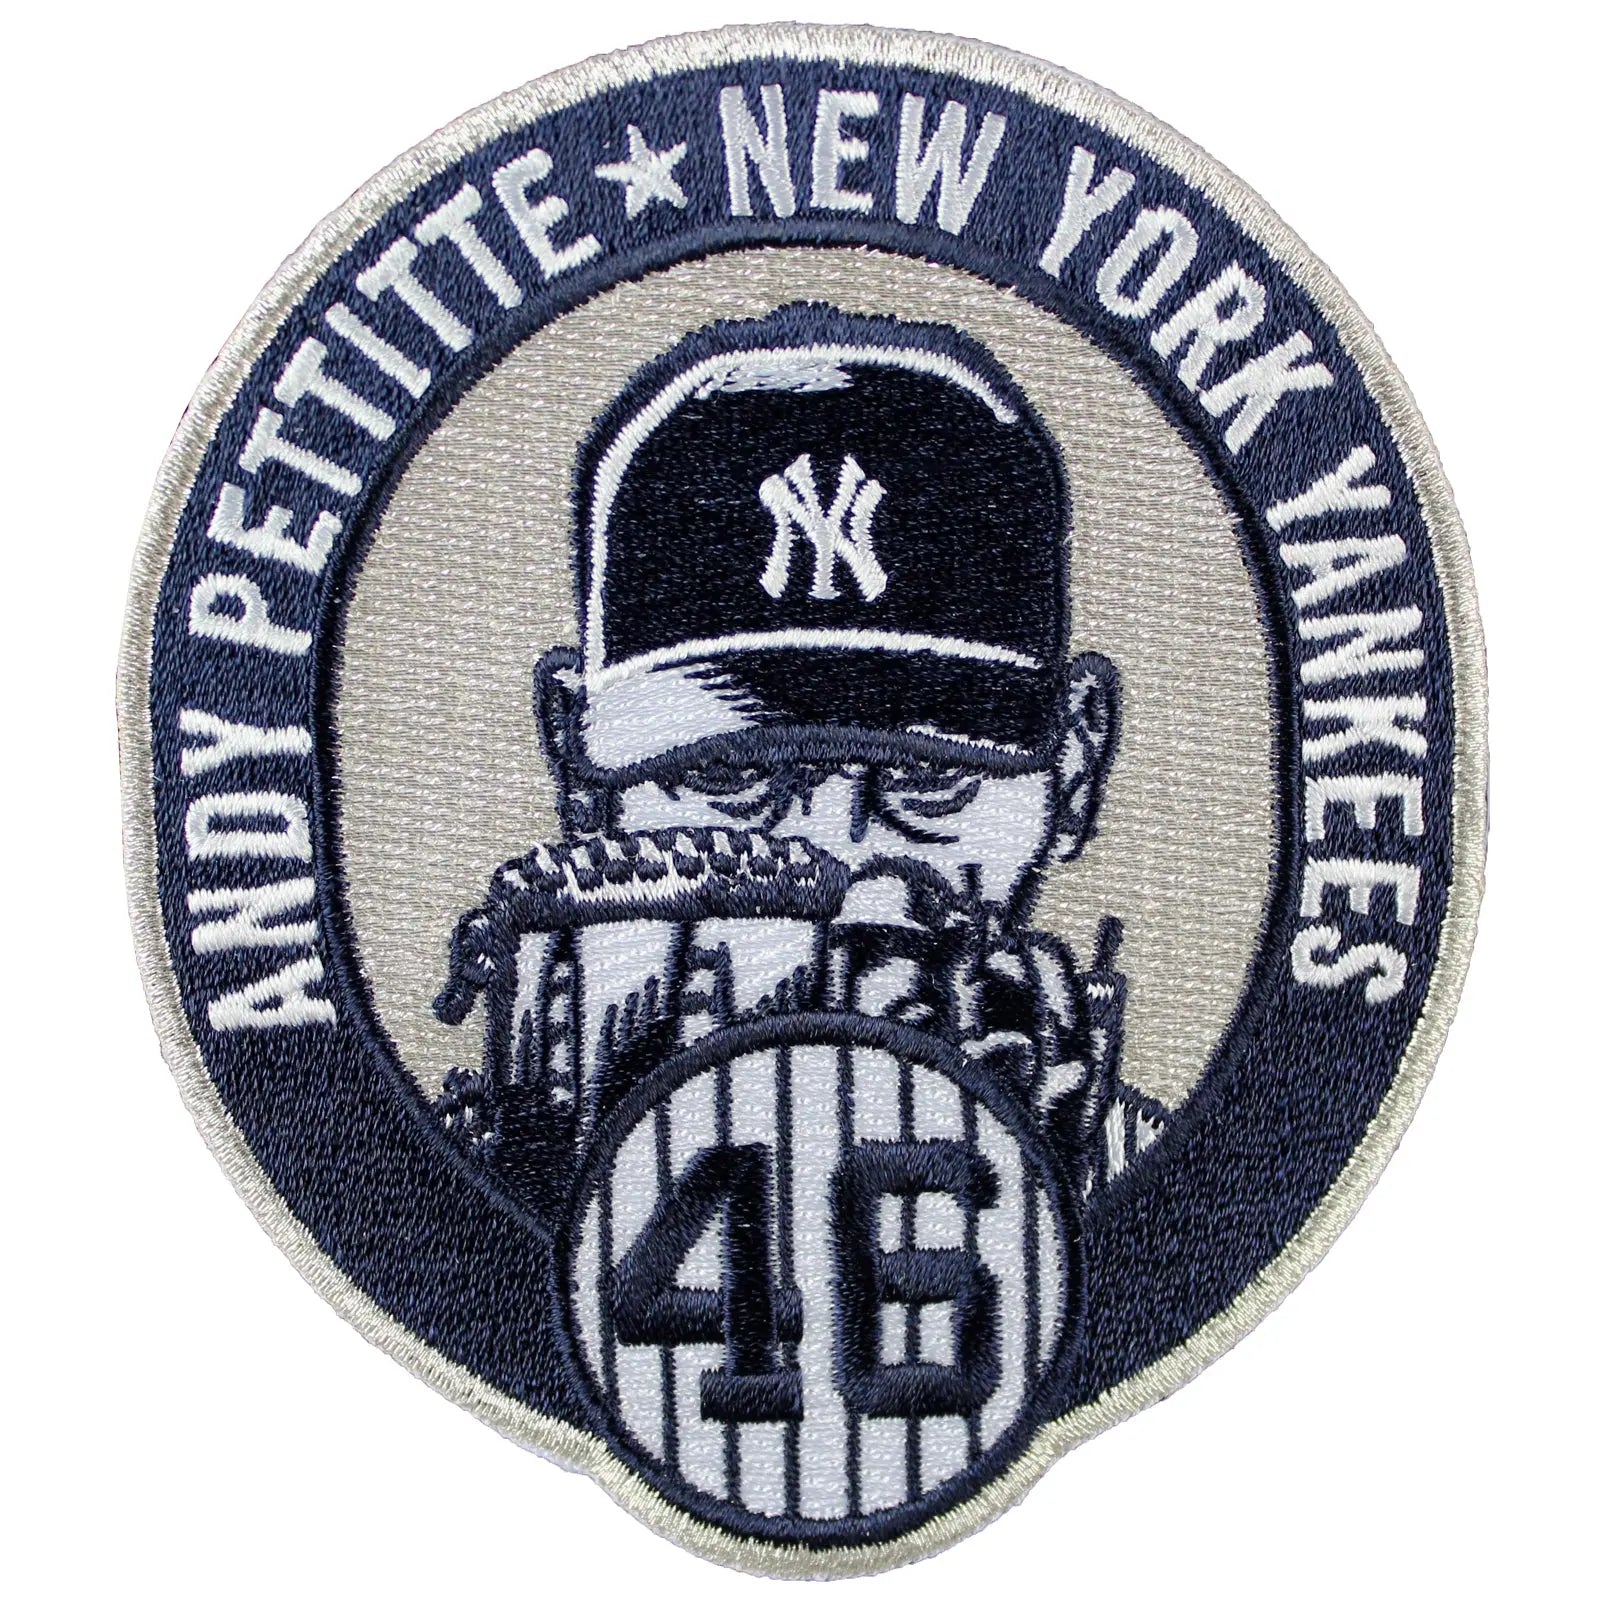 Andy Pettitte Number 46 Retirement Patch – The Emblem Source